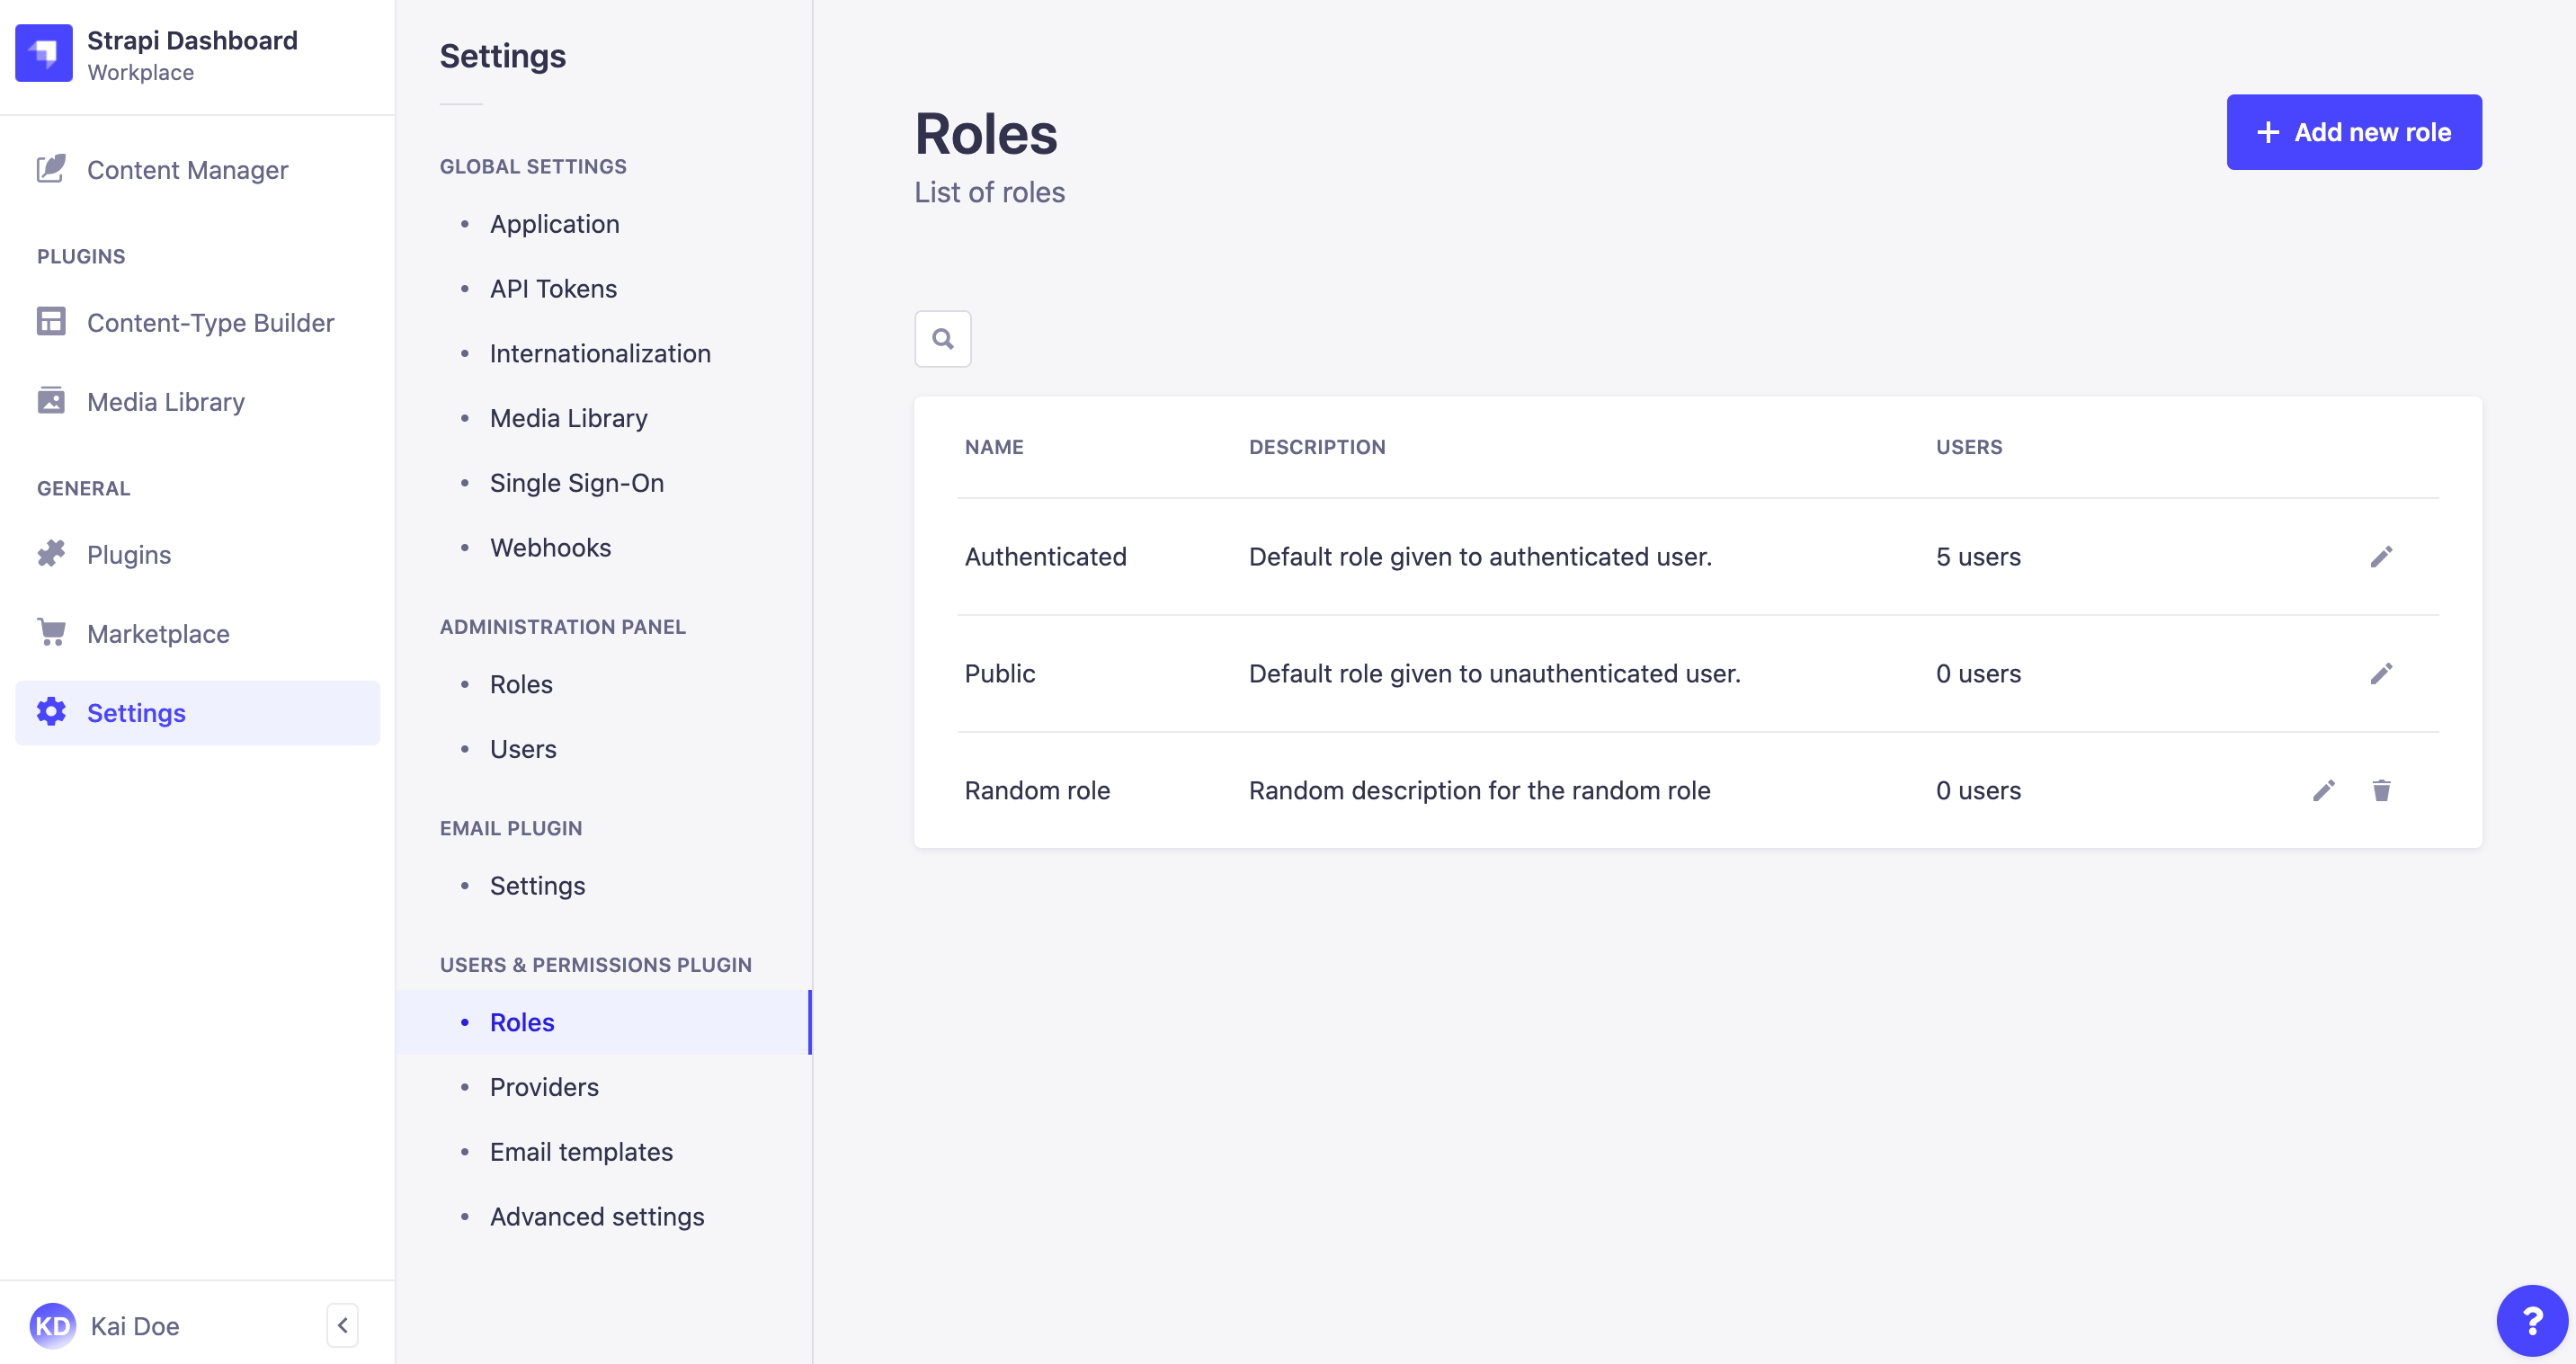 End-users roles interface